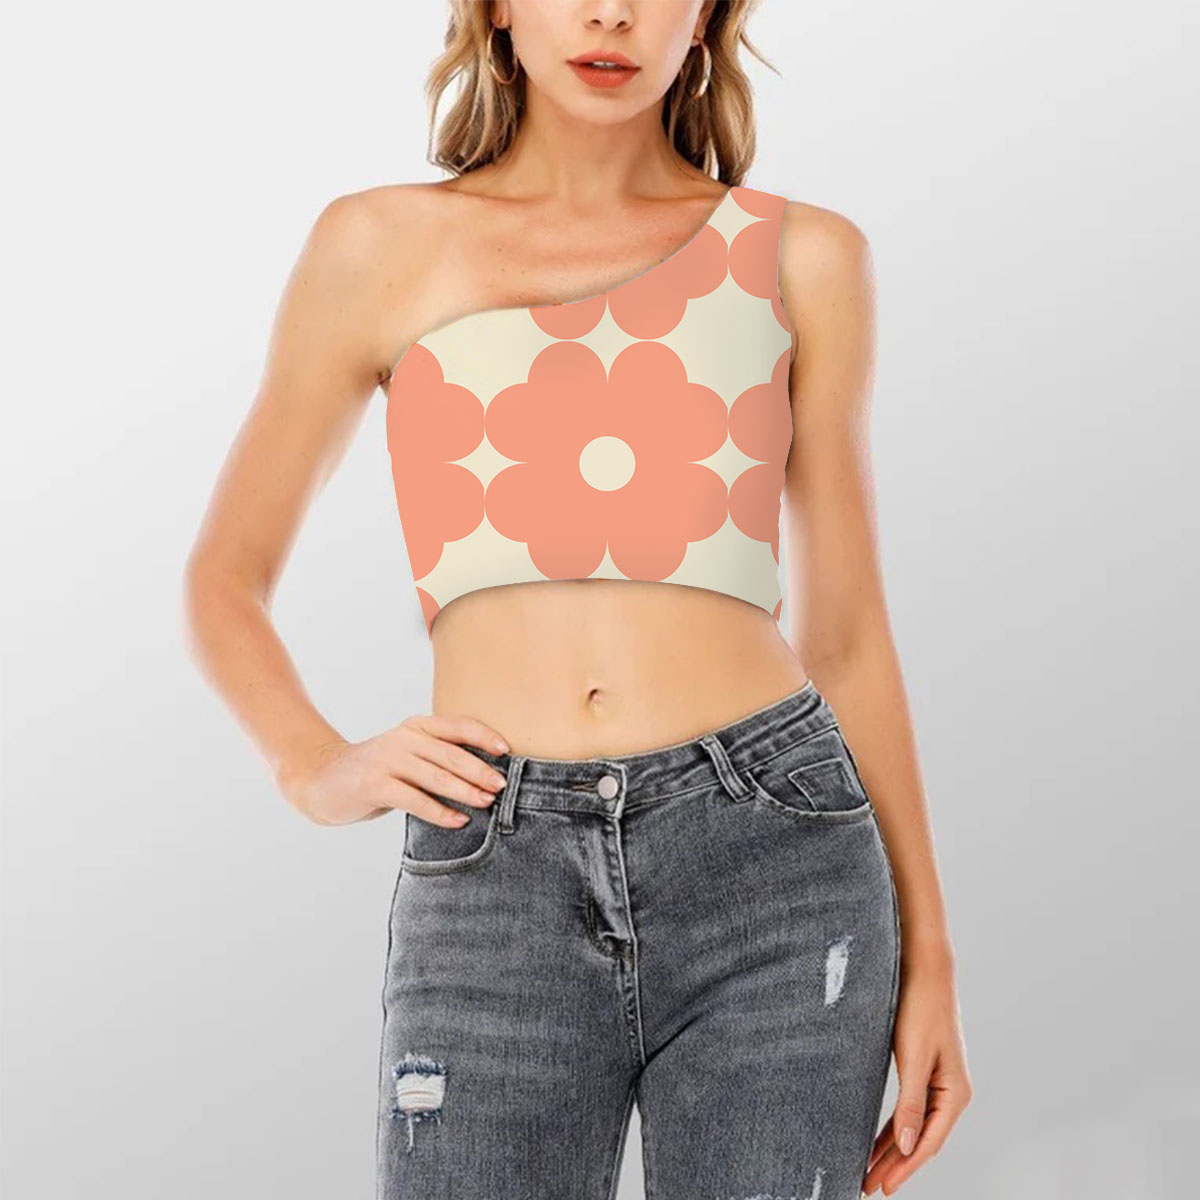 Geometric Mid Century Modern Style Shoulder Cropped Top